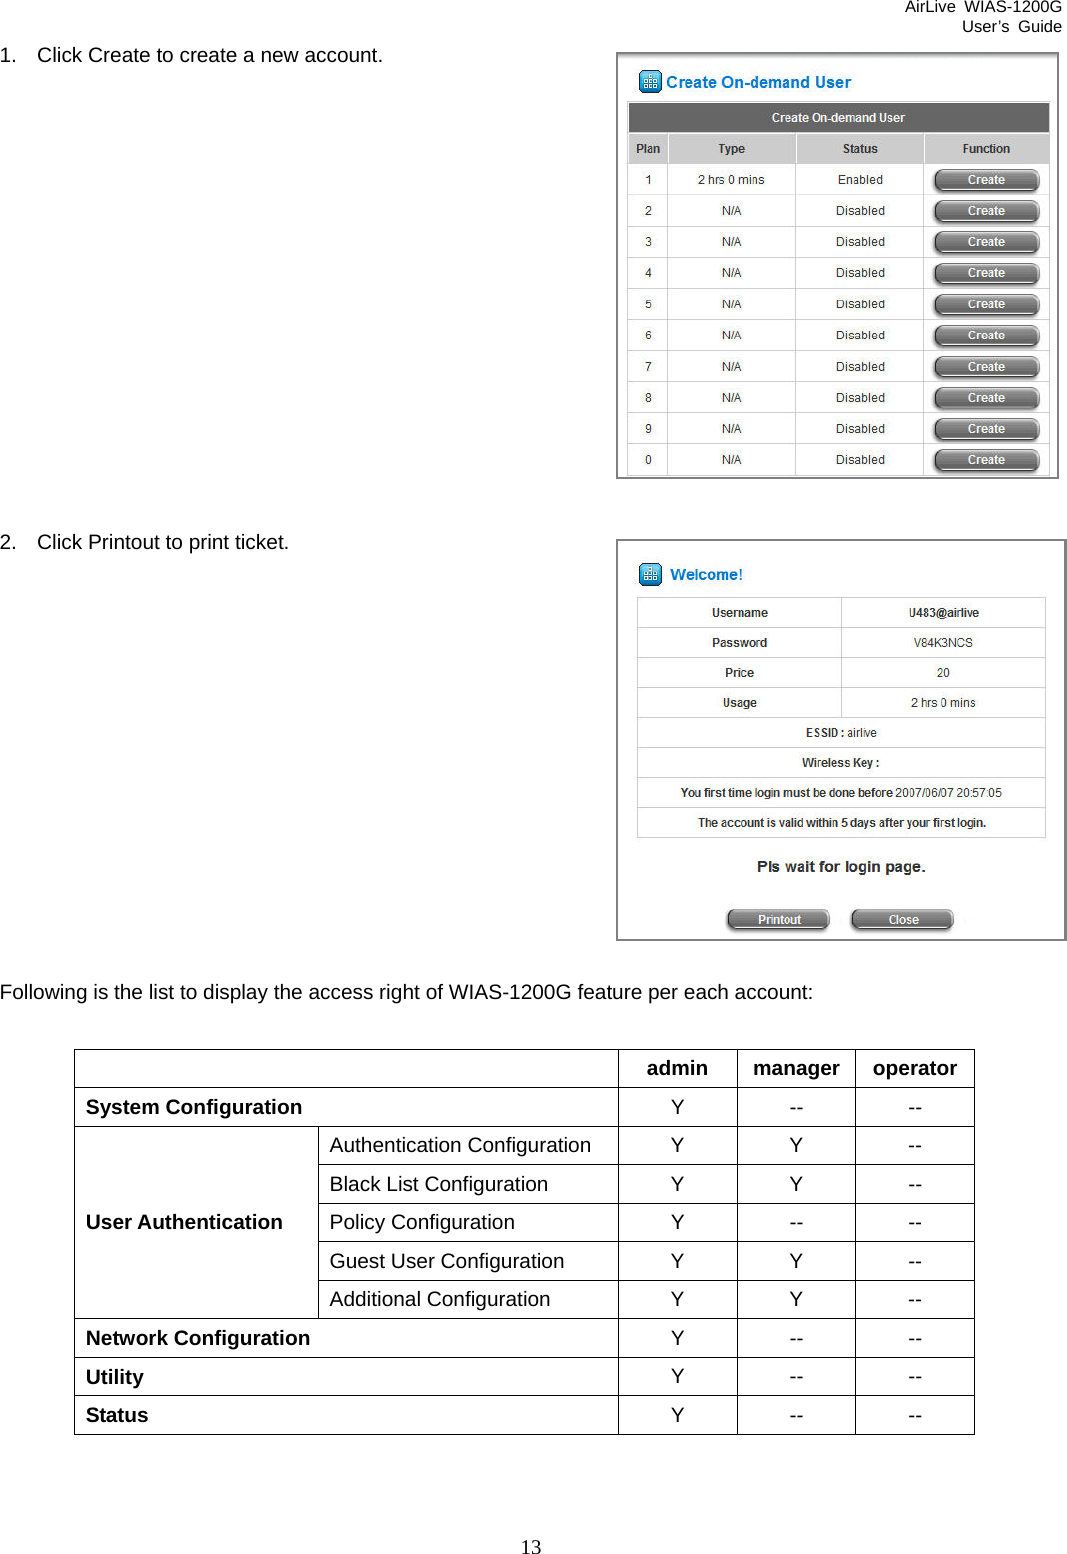 AirLive WIAS-1200G User’s Guide 13 1.  Click Create to create a new account.             2.  Click Printout to print ticket.            Following is the list to display the access right of WIAS-1200G feature per each account:   admin manager operatorSystem Configuration  Y -- -- Authentication Configuration Y Y -- Black List Configuration  Y  Y  -- Policy Configuration  Y  --  -- Guest User Configuration Y Y -- User Authentication Additional Configuration  Y Y -- Network Configuration  Y -- -- Utility  Y -- -- Status  Y -- --  